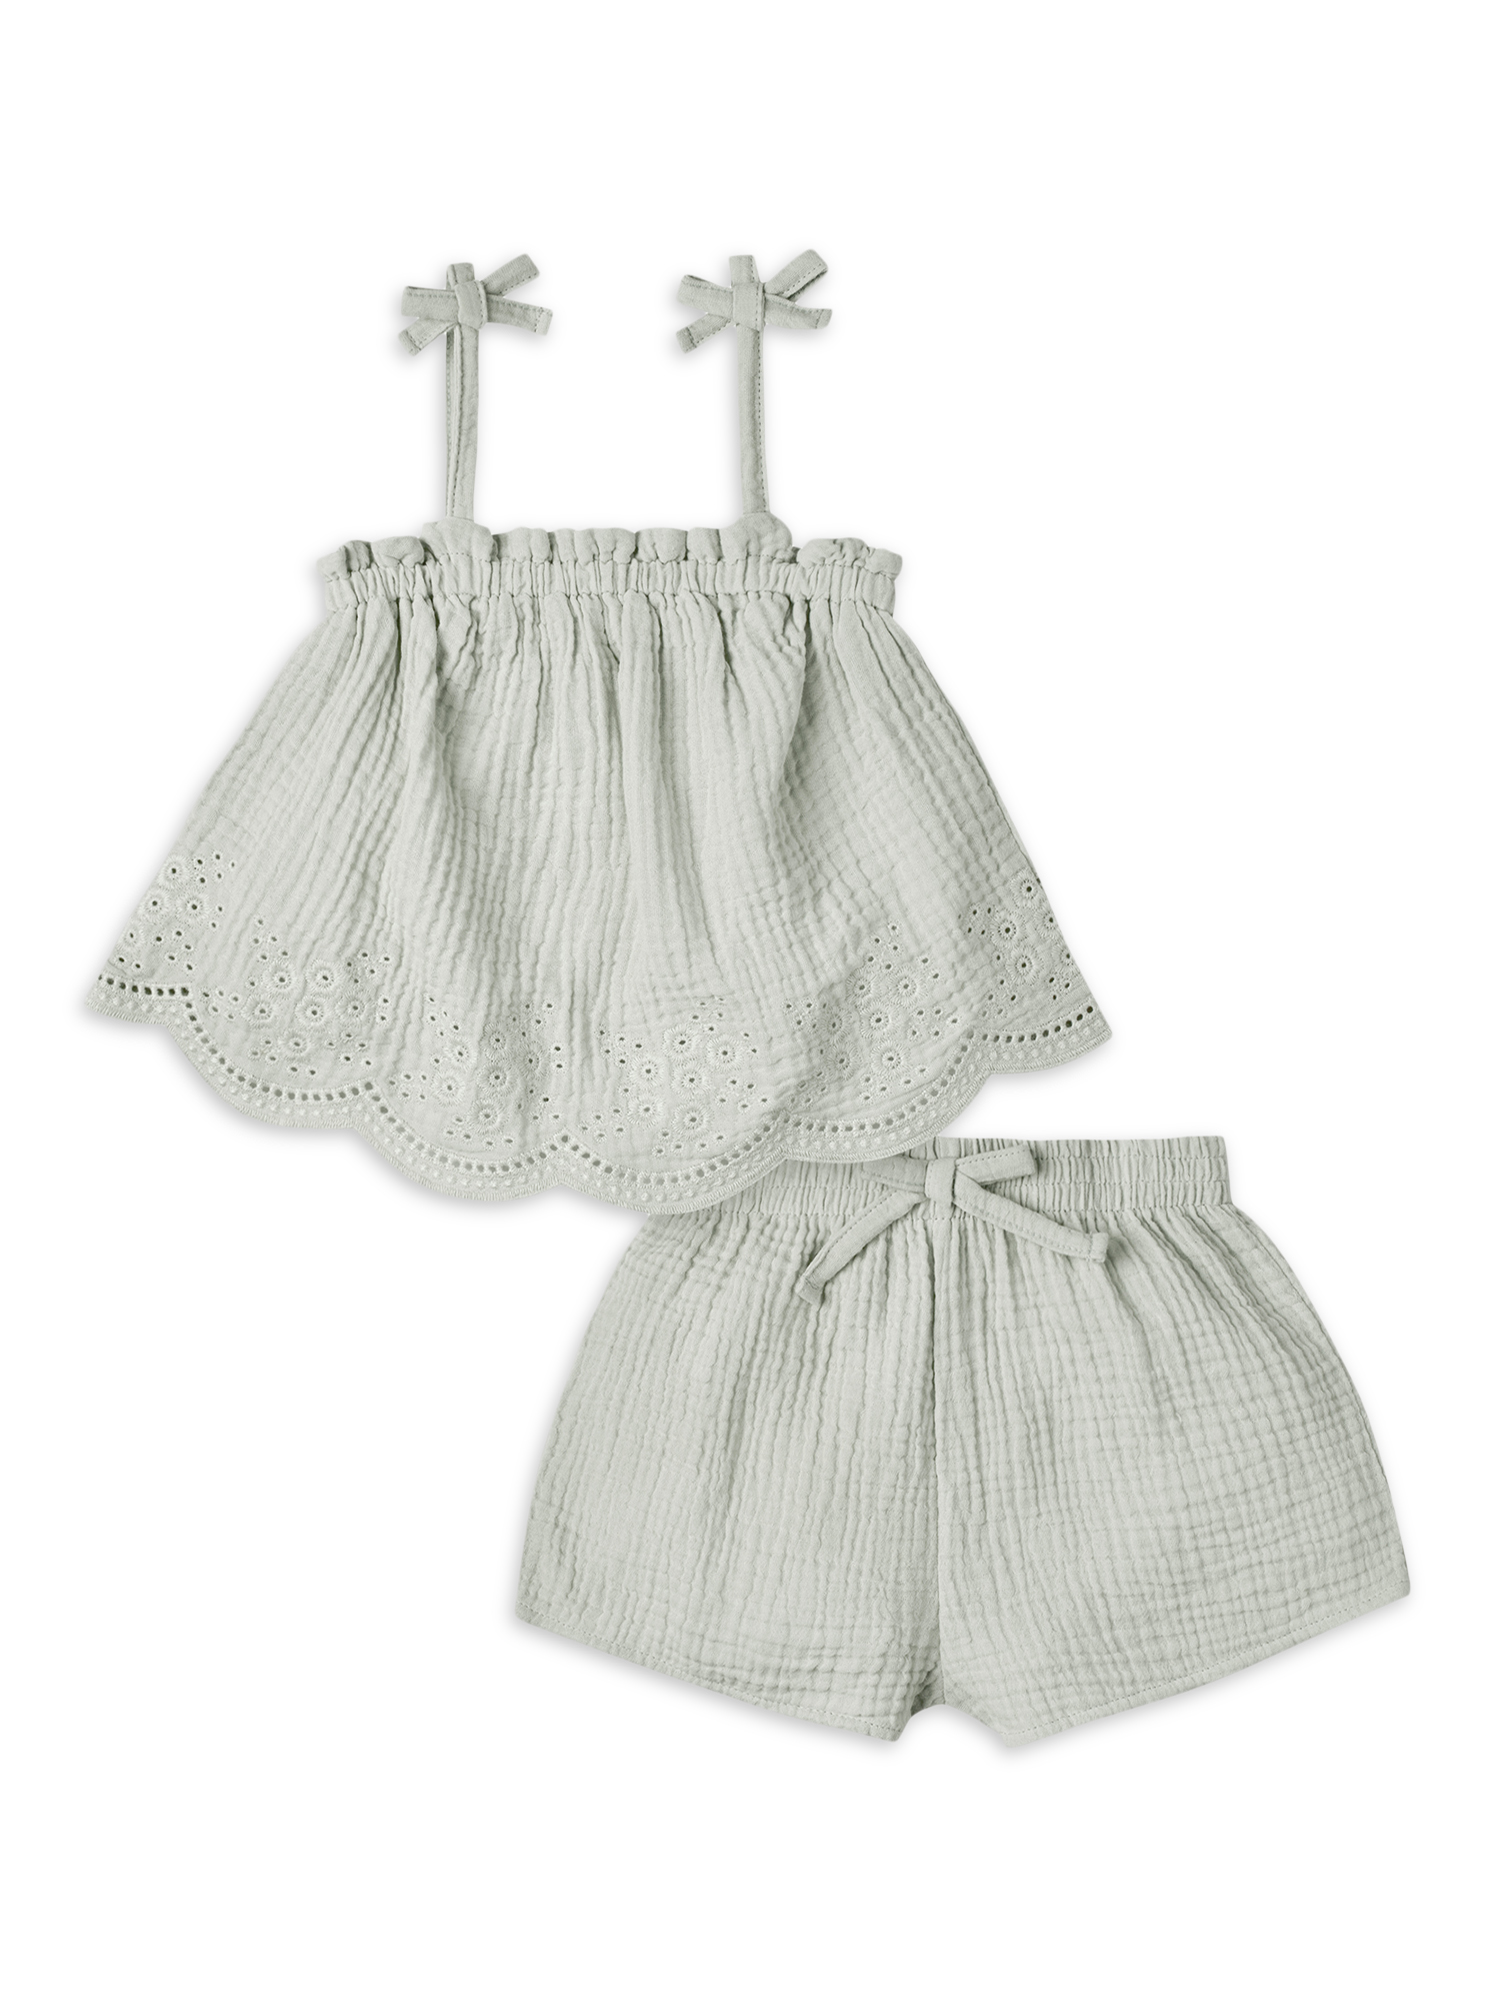 Modern Moments by Gerber Toddler Girl Eyelet Trim Gauze Top and Shorts Set, 2-Piece, Sizes 12M-5T - image 5 of 13